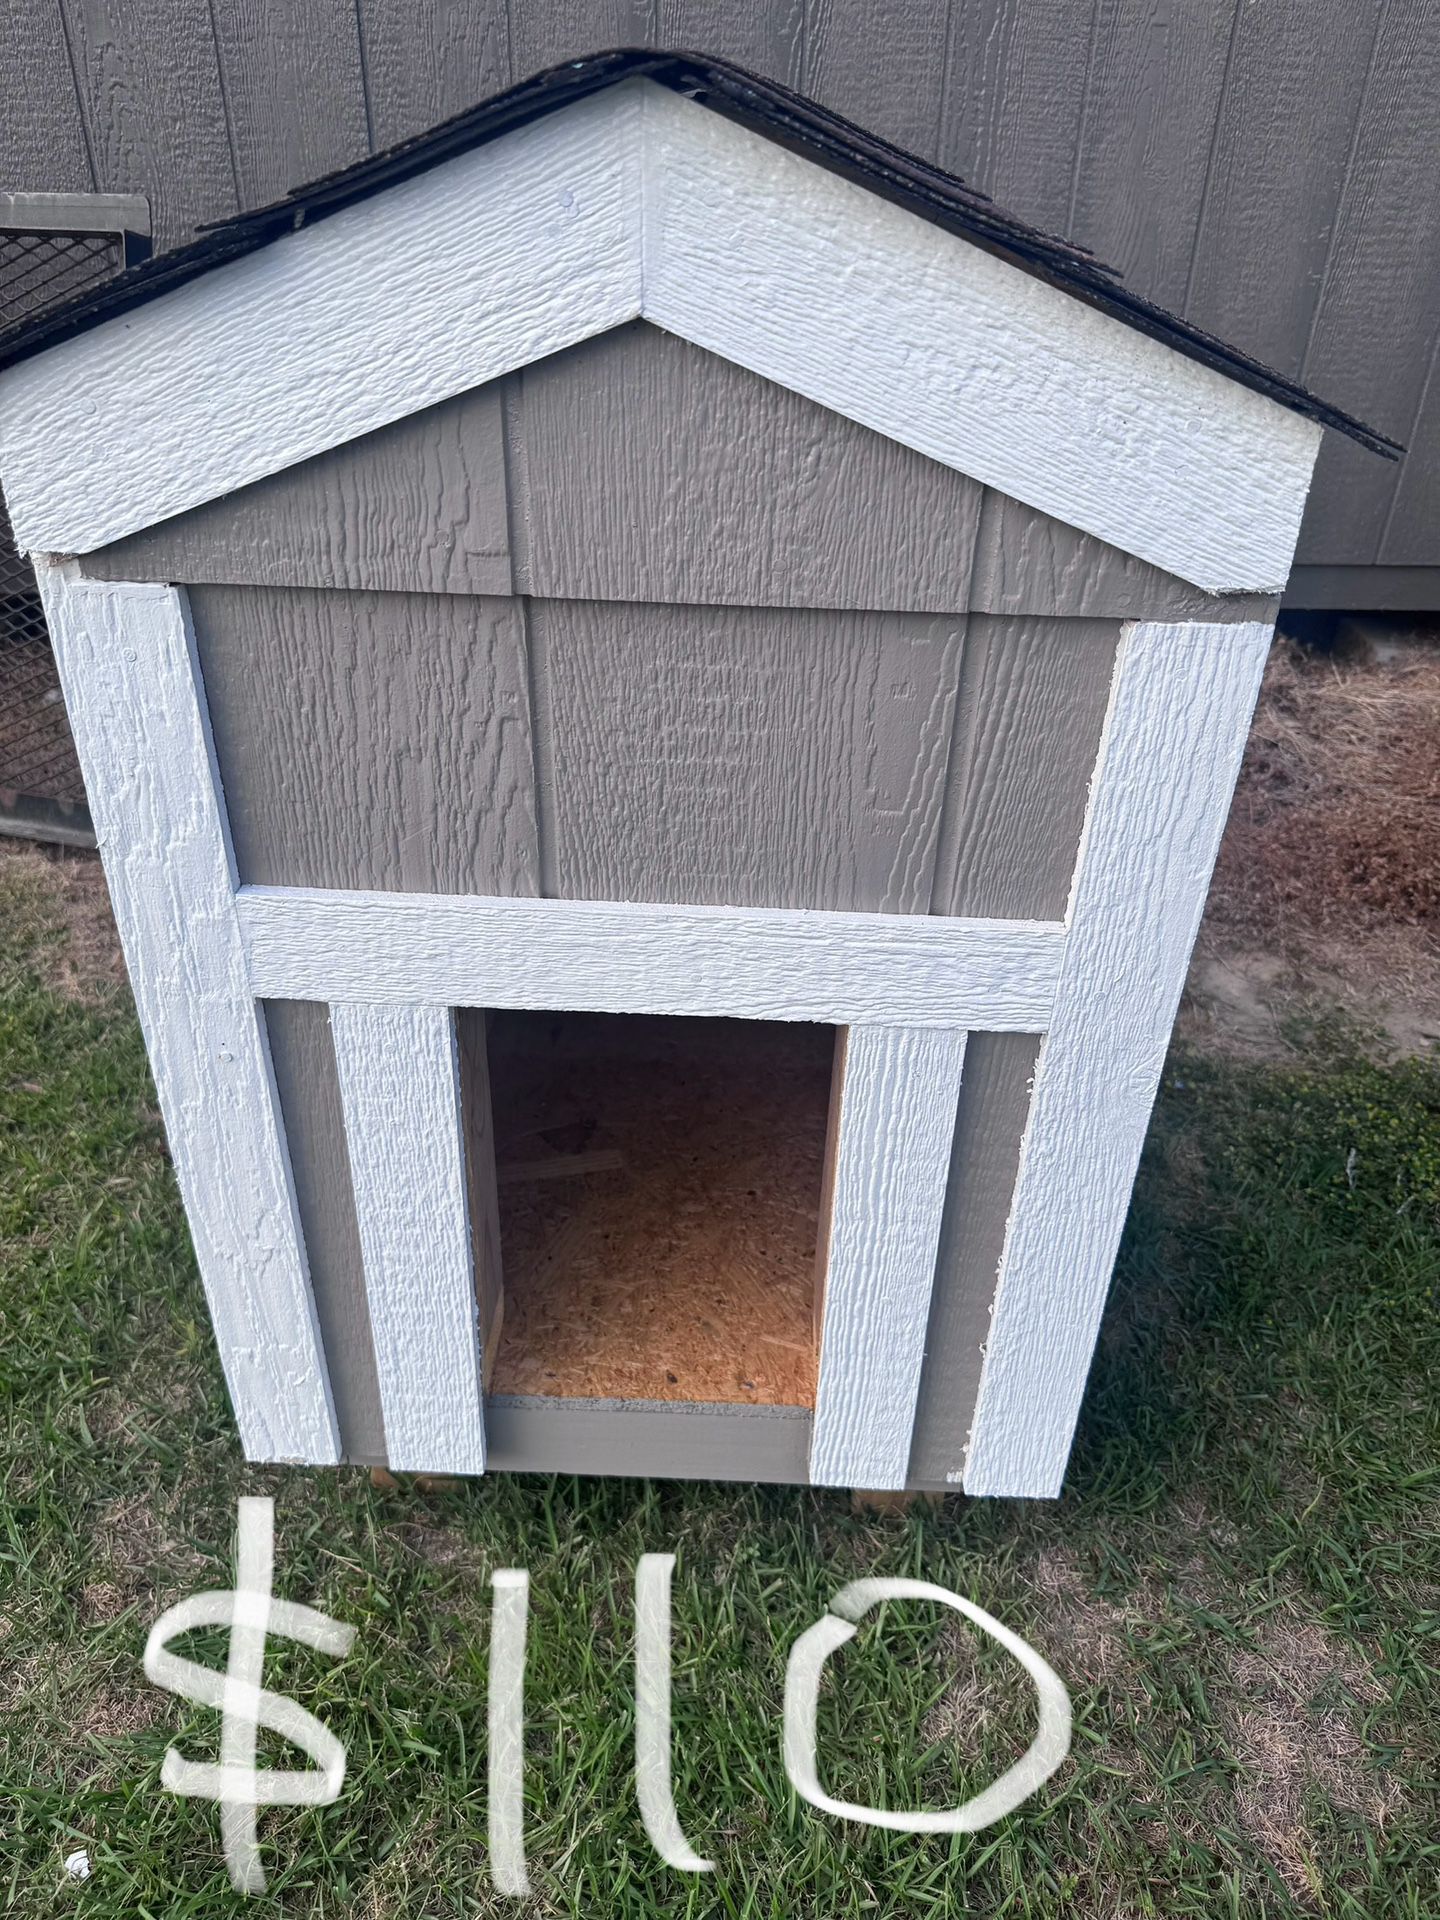 Dog houses for small medium size dogs